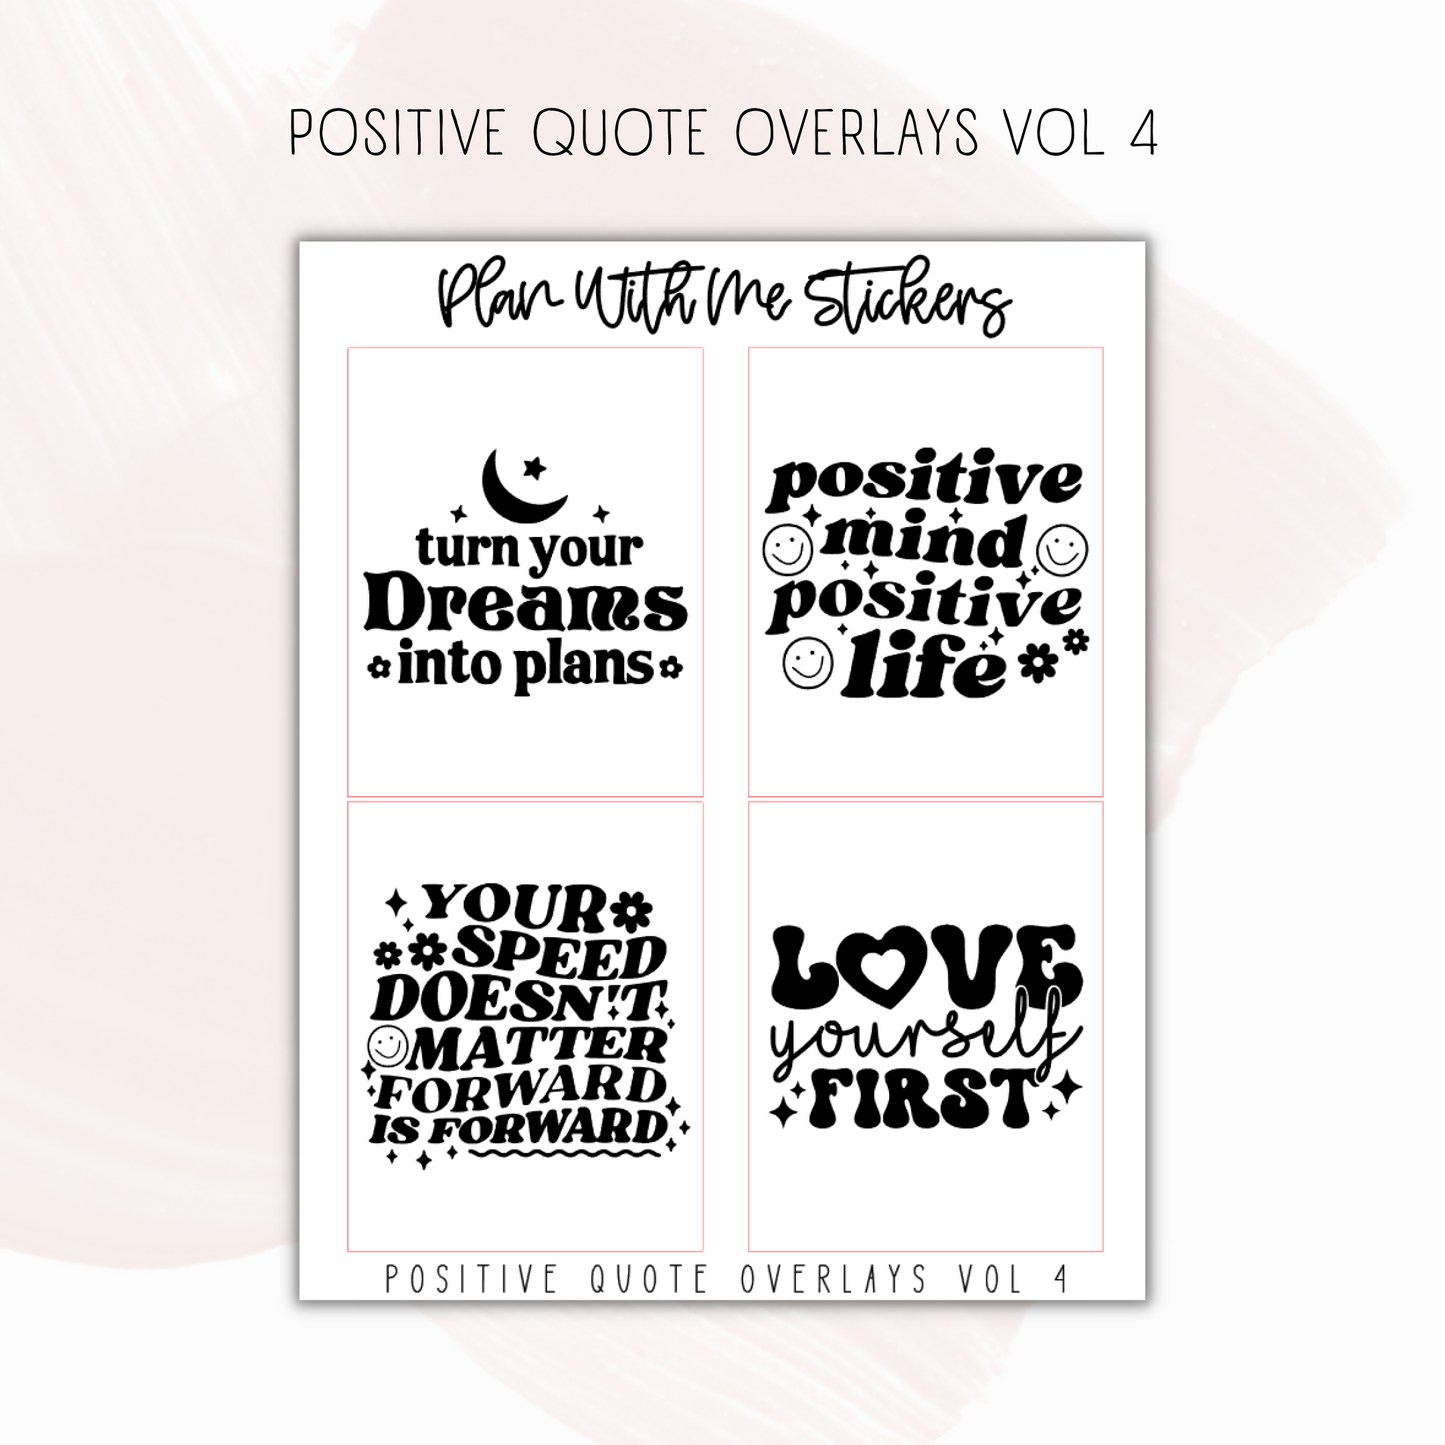 Positive Quote Overlays Vol 4